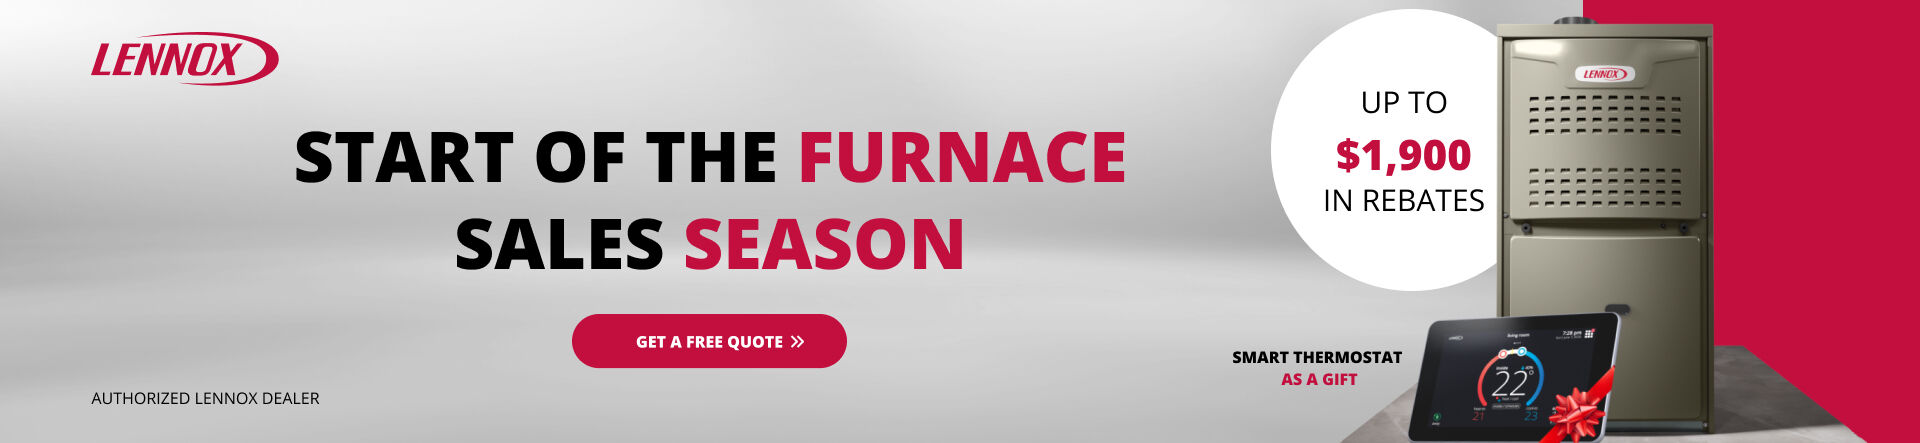 Banner_Home Page_promo_Lennox Furnace